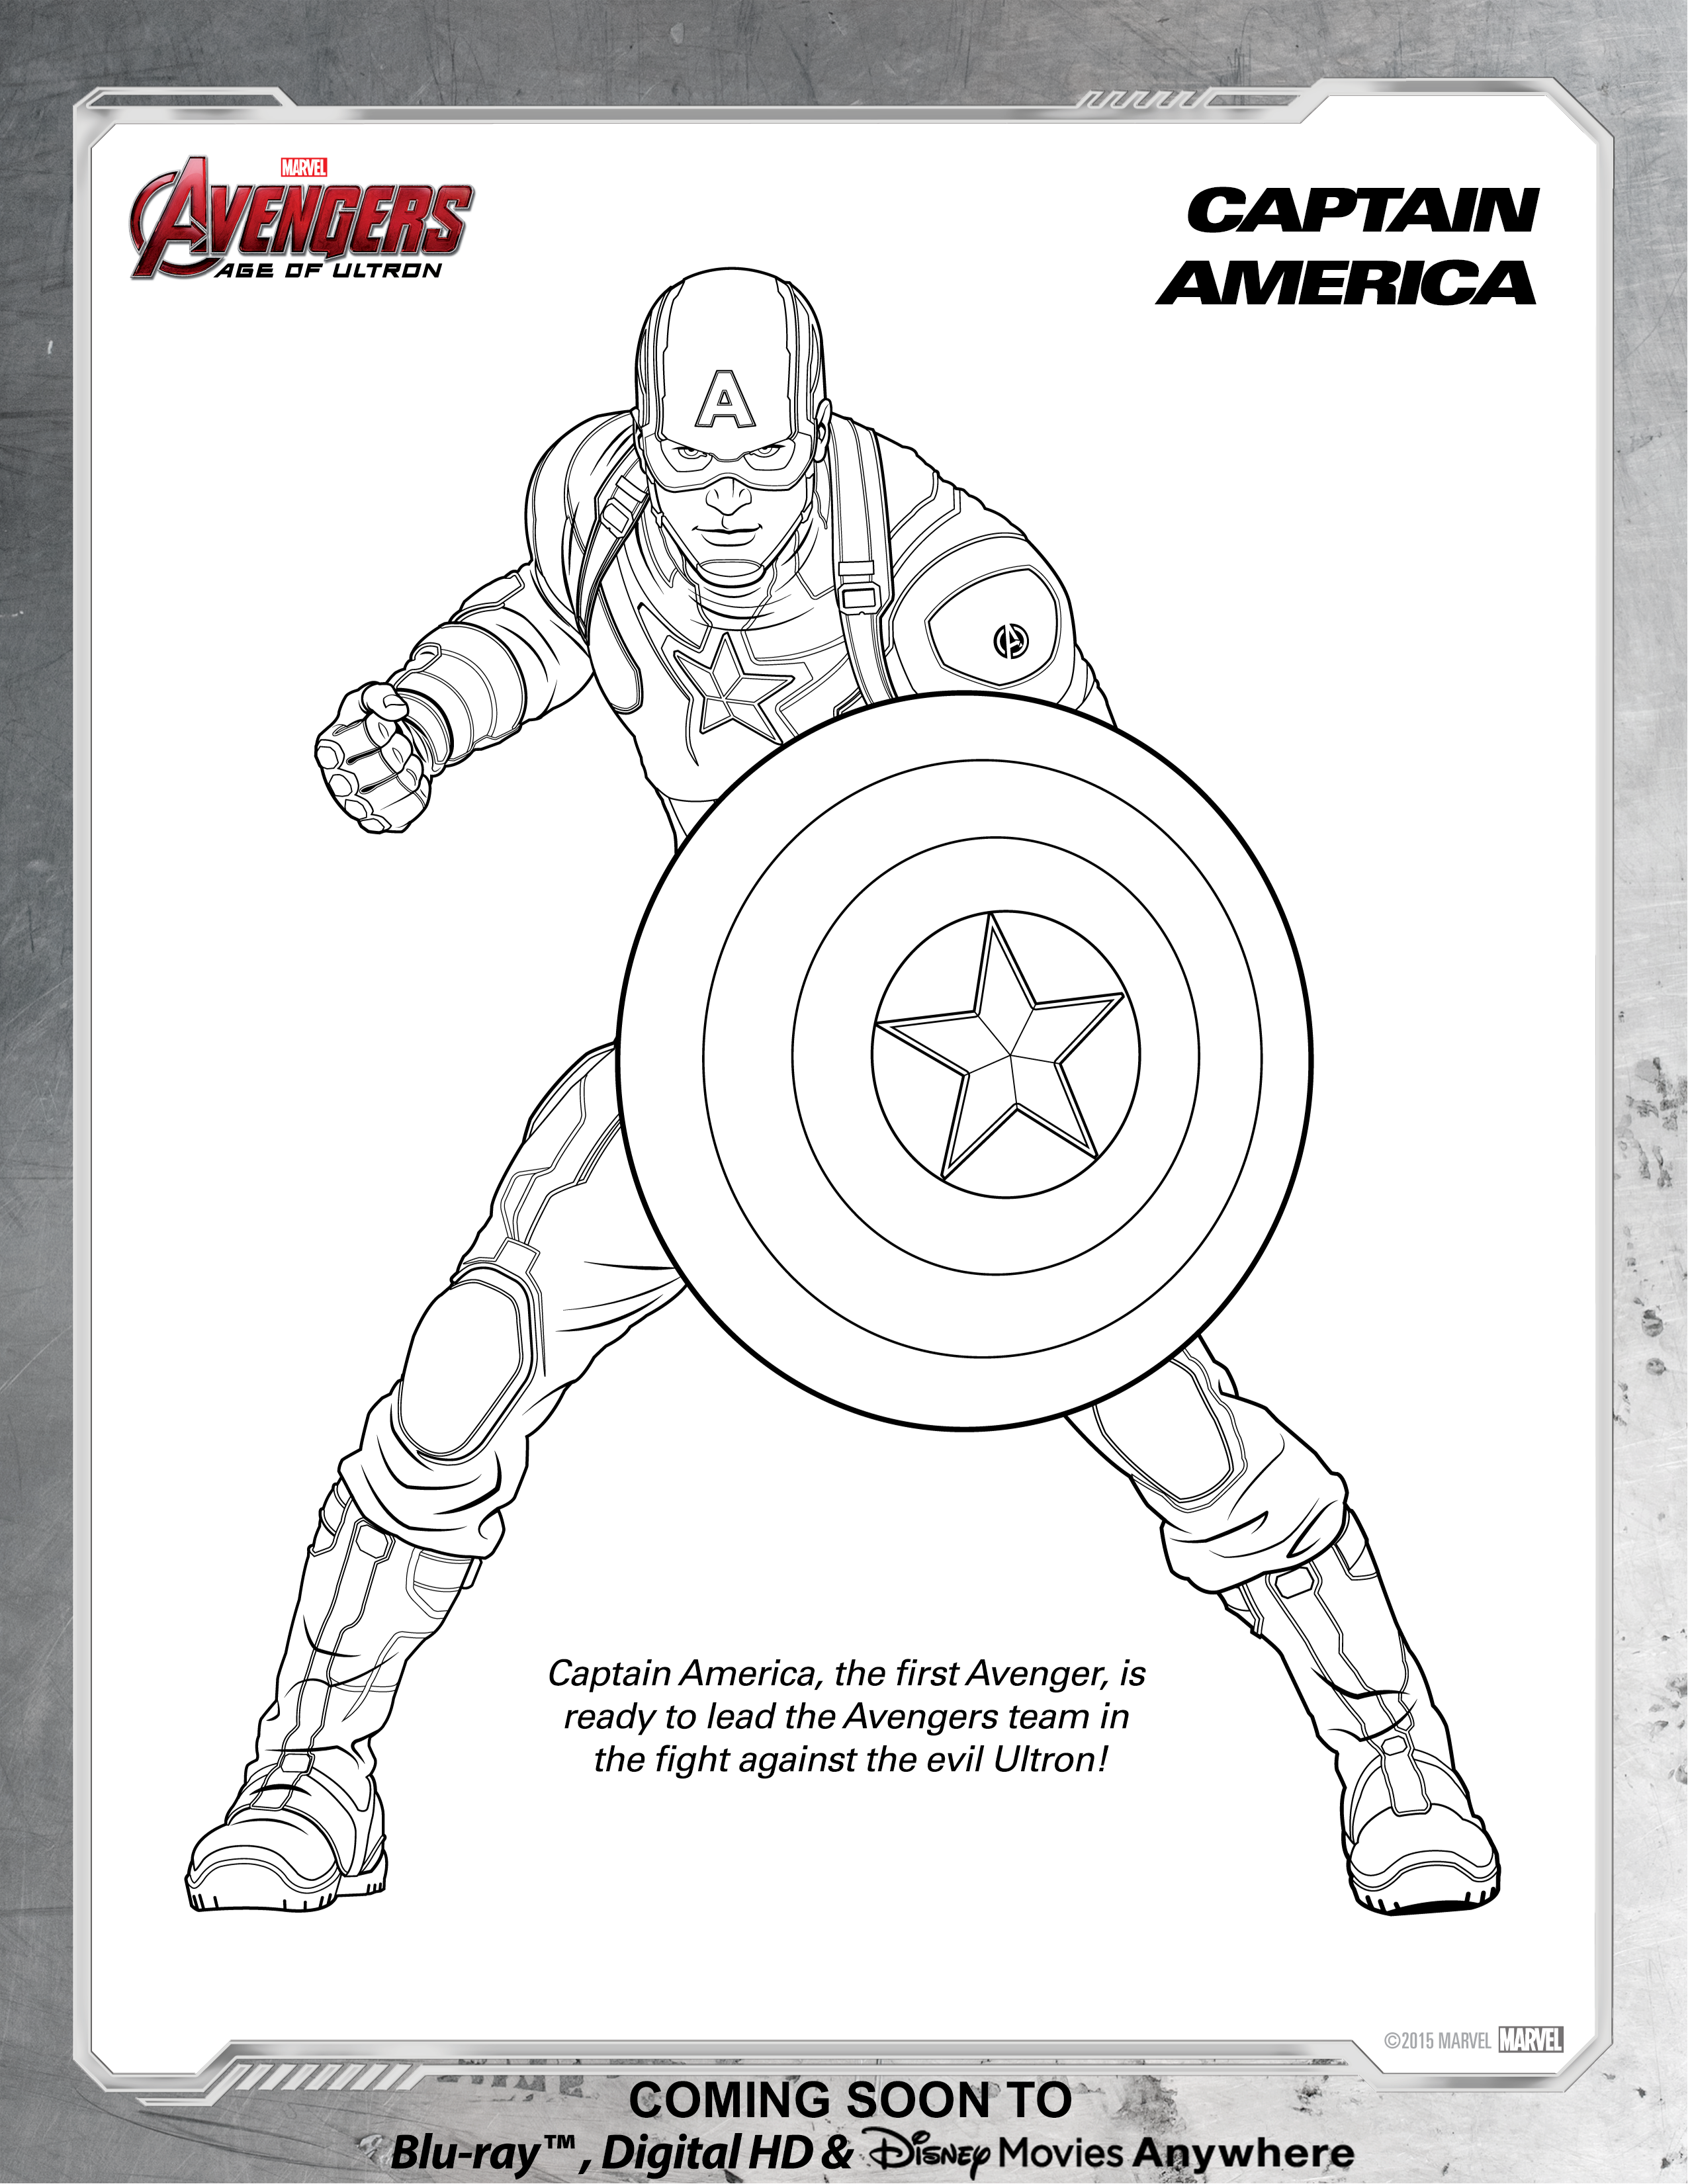 Avengers Captain America Coloring Page Disney Movies